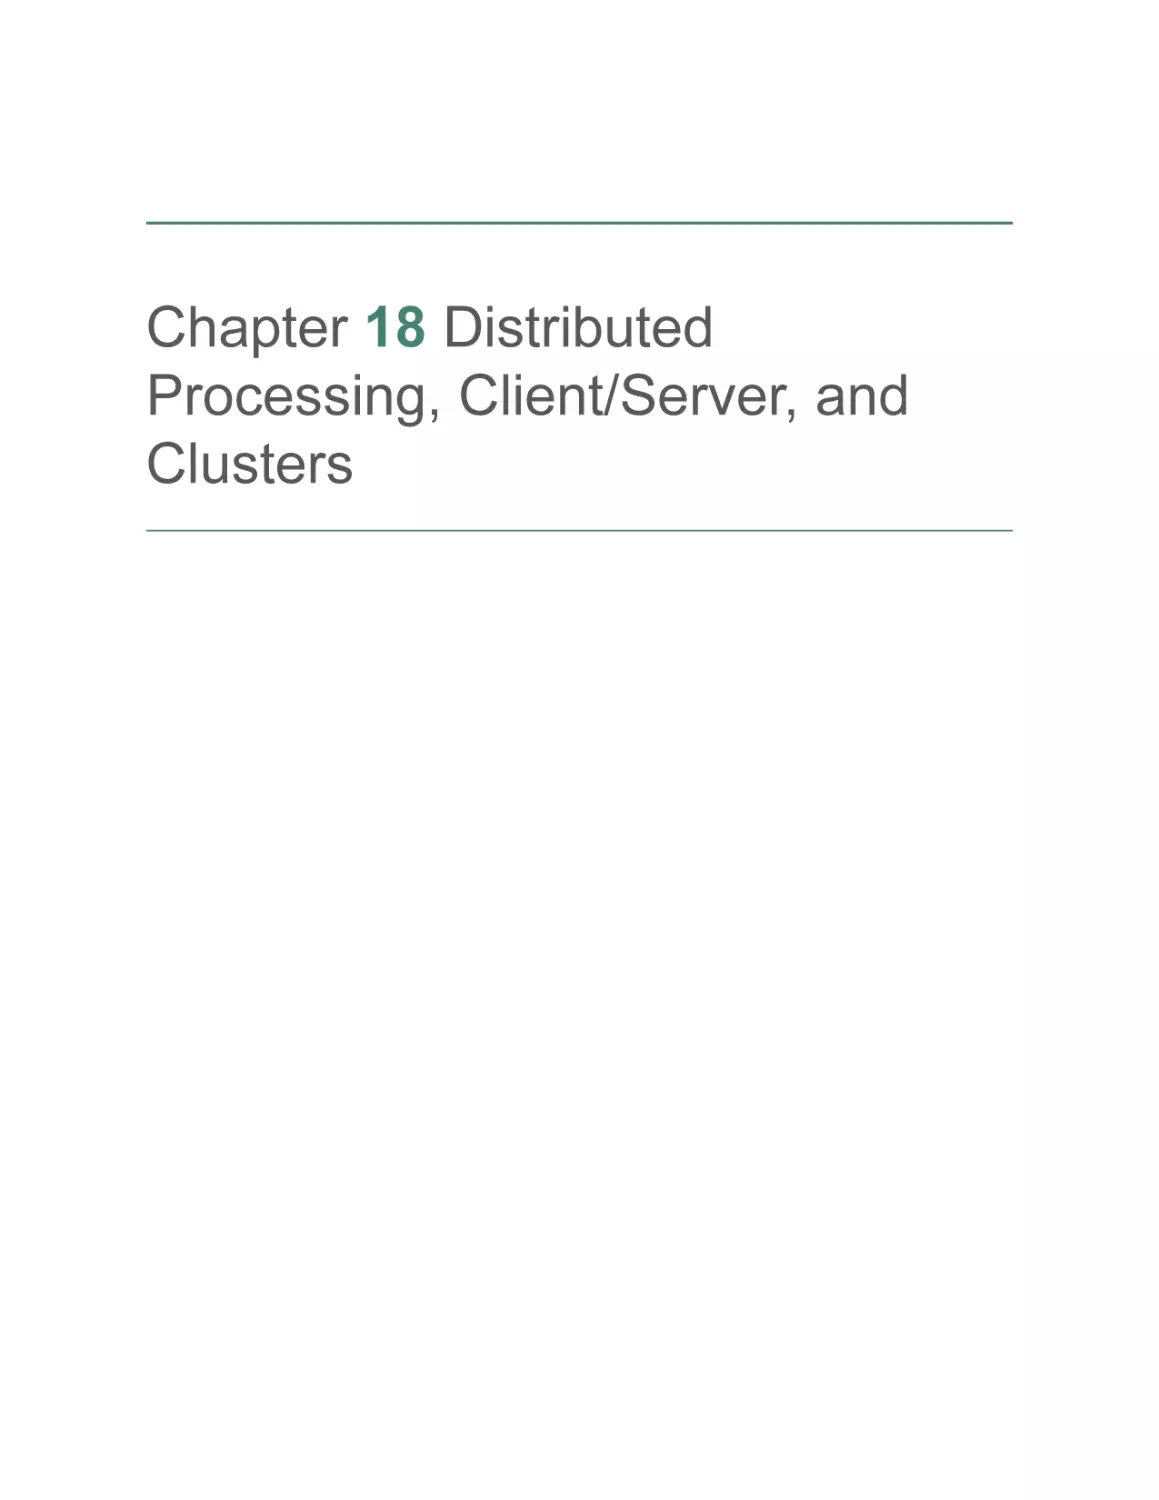 Chapter 18 Distributed Processing, Client/Server, and Clusters